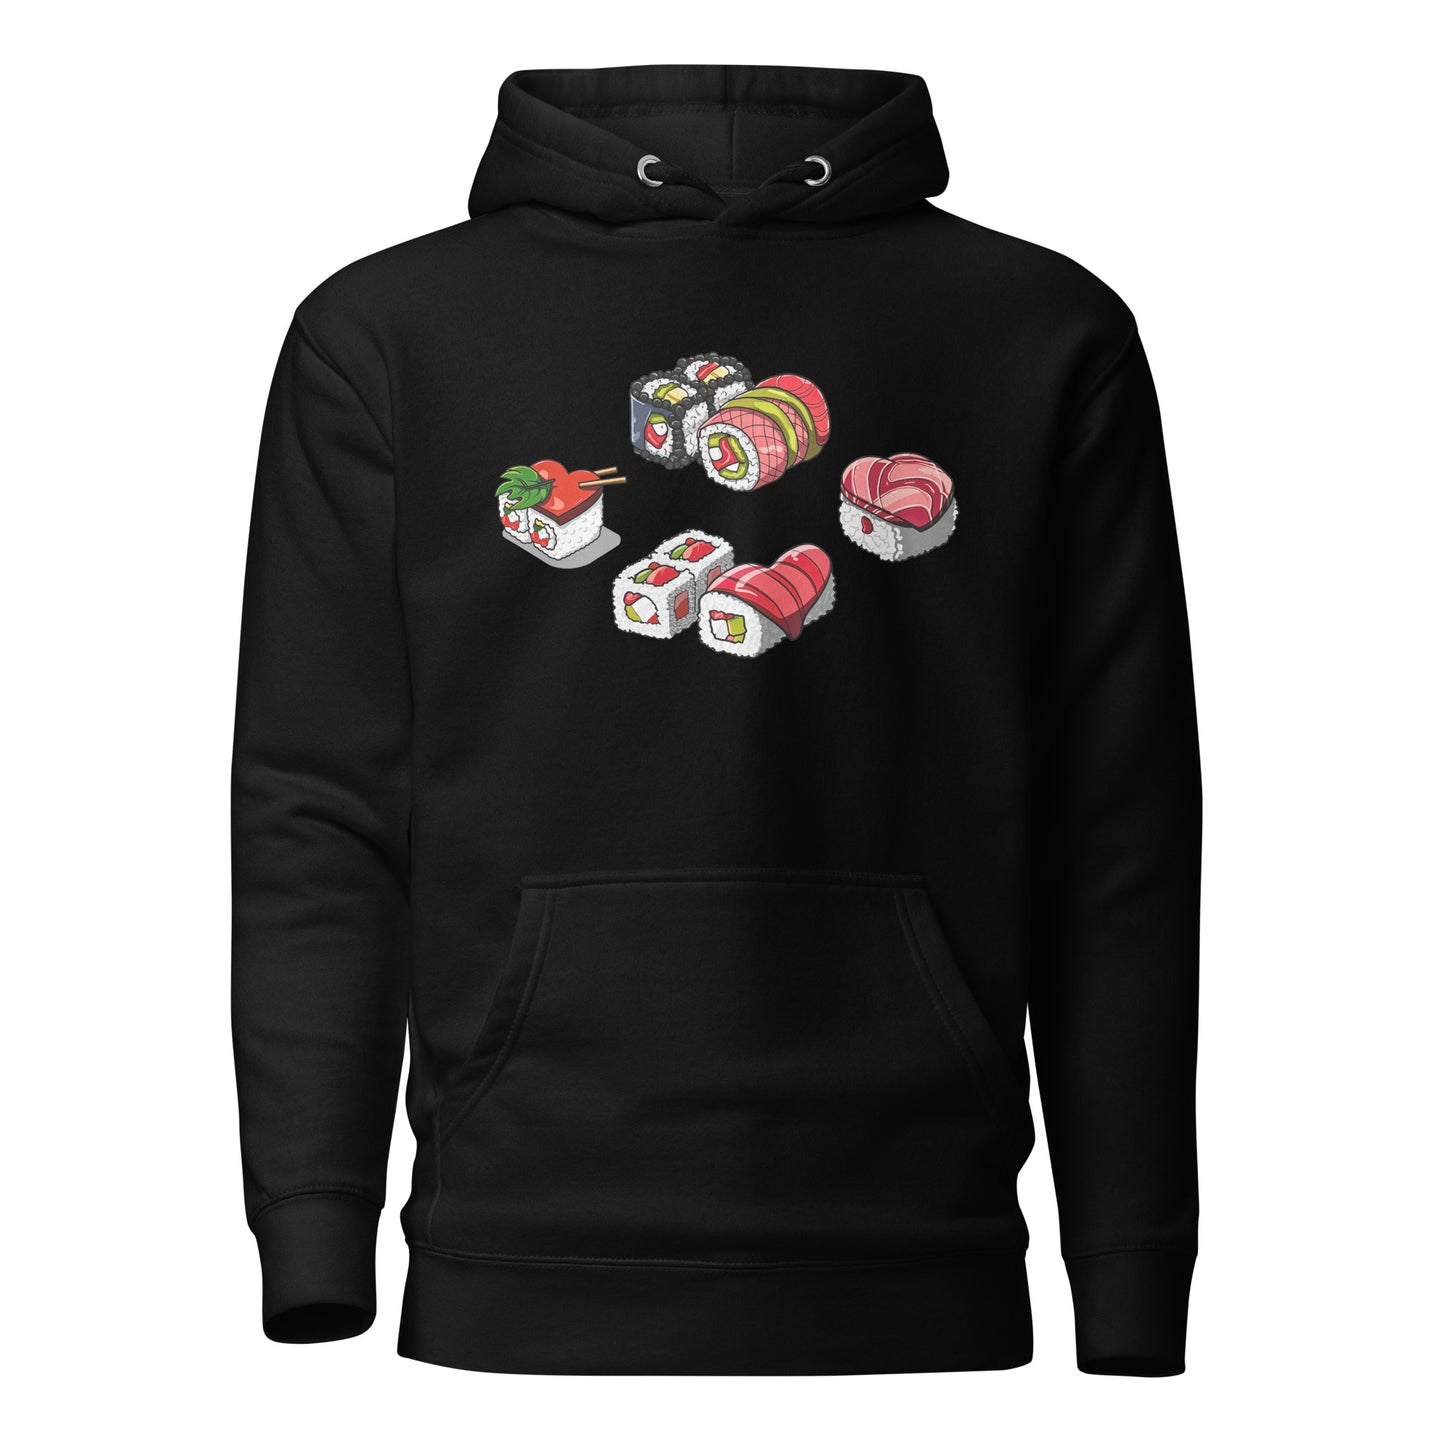 Sushi Lovers Hoodie, Men and Women gifts for loved ones, loved sushi lovers, sushi hoodies, hoodies for sushi lovers, unisex hoodies for loved ones, valentines gift, love gift, cool sushi designs by knqv, Unisex Hoodie